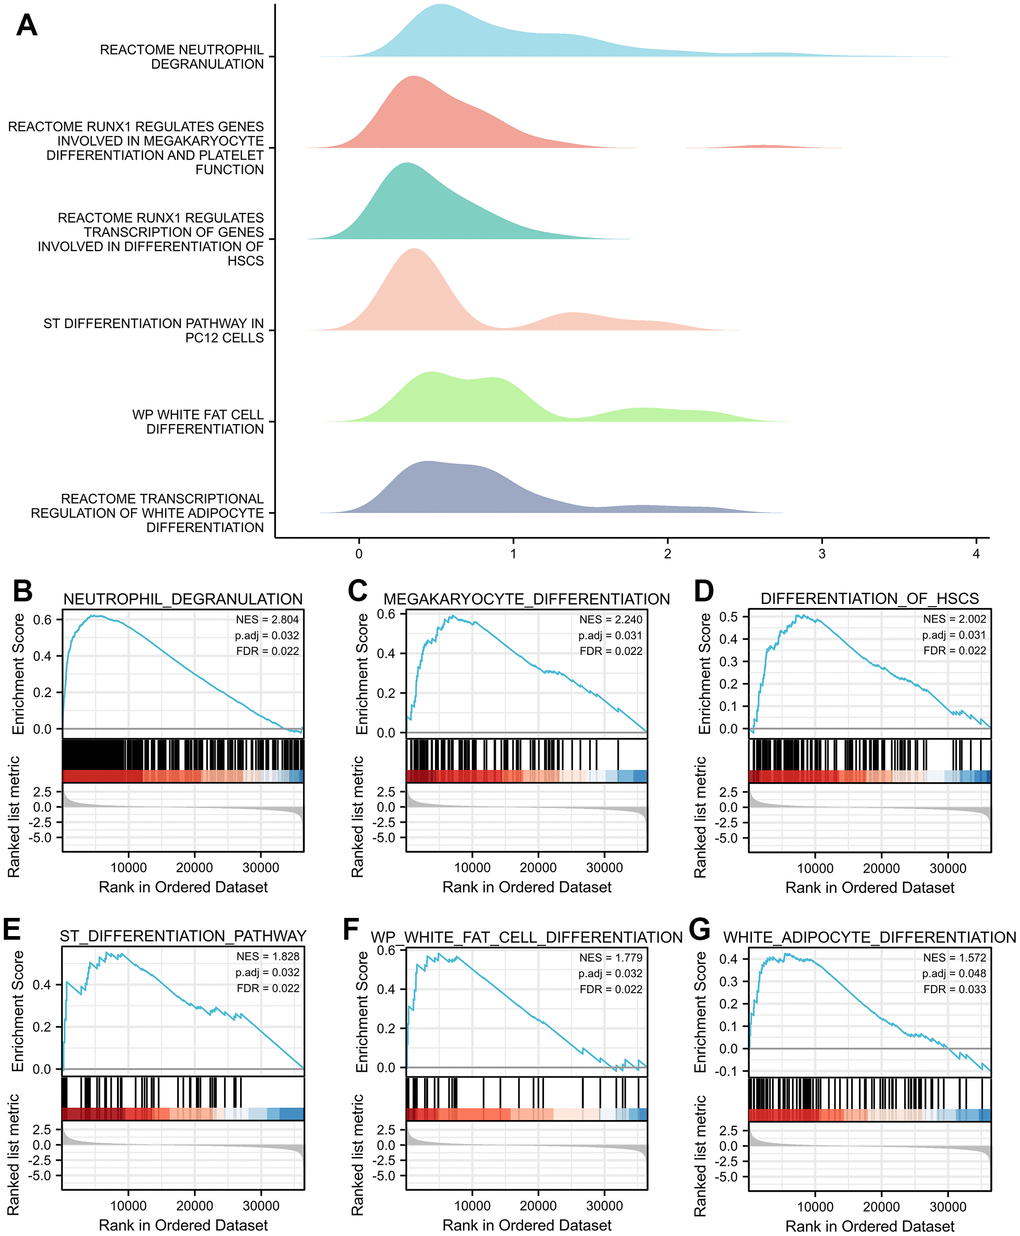 GSEA of genes correlated with TNFAIP2 in AML patients. (A) The ridge plot of the GSEA results of TNFAIP2-correlated genes revealed associations with multiple cell differentiation pathways. (B–G) Neutrophil, Megakaryocyte, Haematopoietic Stem Cell, Neural Stem Cell, White Fat Cell and White Adipocyte.